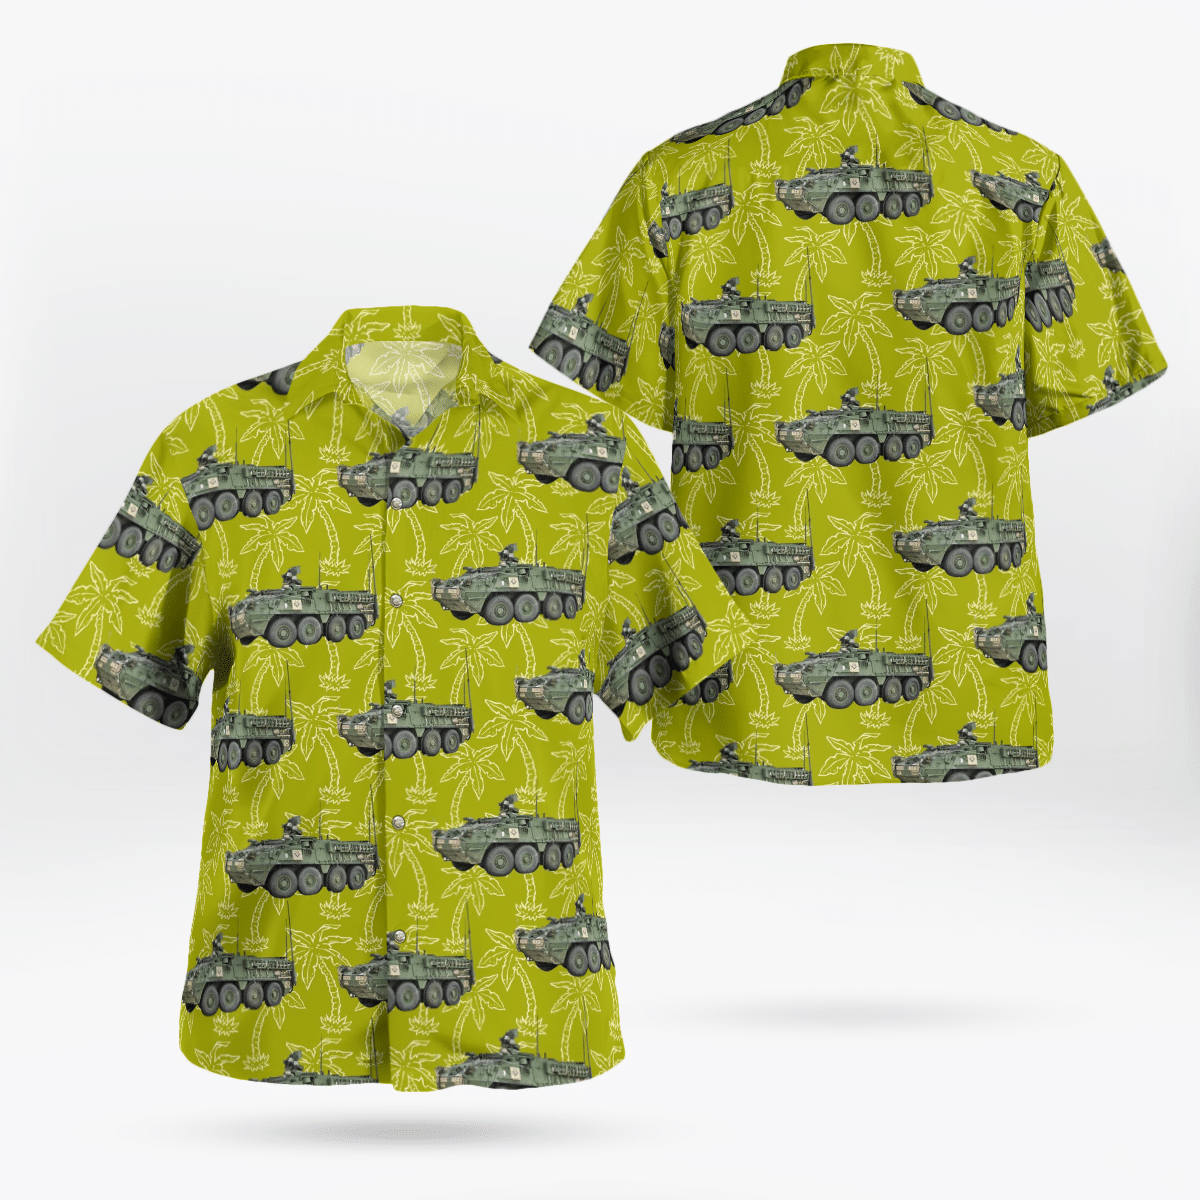 Shop now to find the perfect Hawaii Shirt for your hobby 240